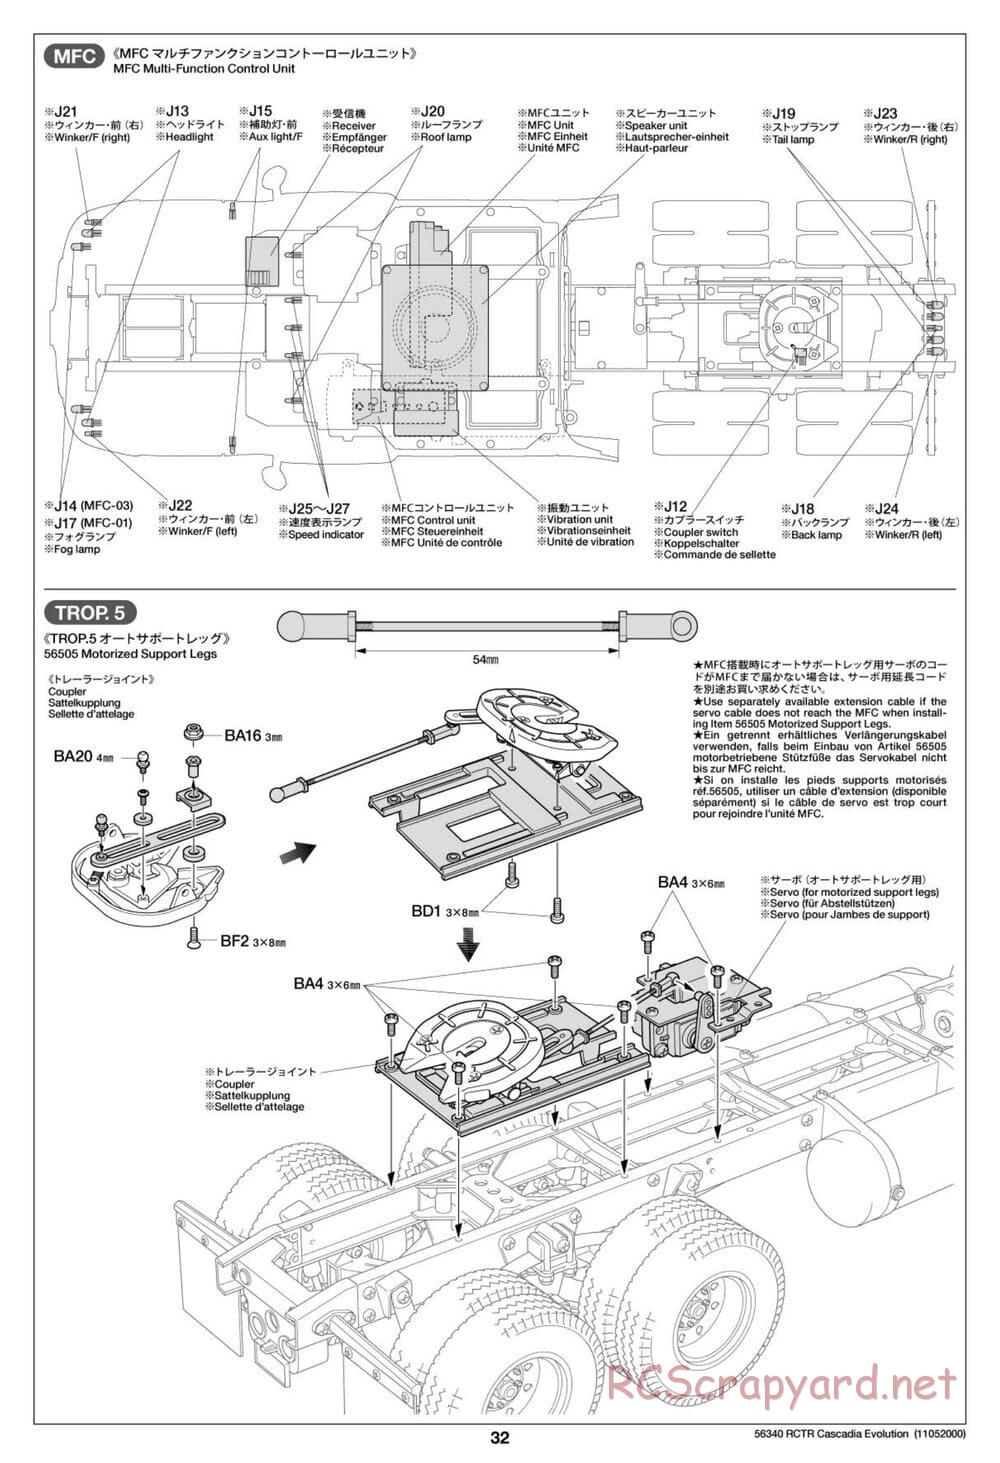 Tamiya - Freightliner Cascadia Evolution Tractor Truck Chassis - Manual - Page 32